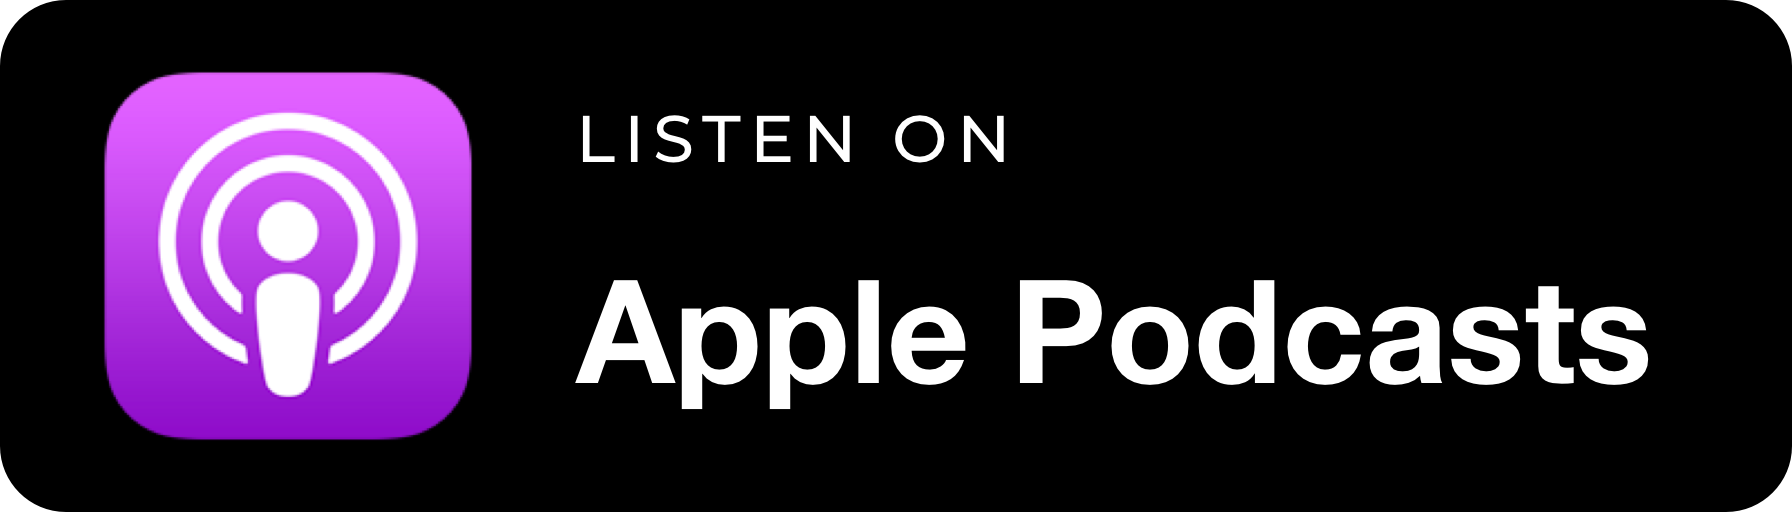 Link to F1 Racing Podcast on Apple Podcast